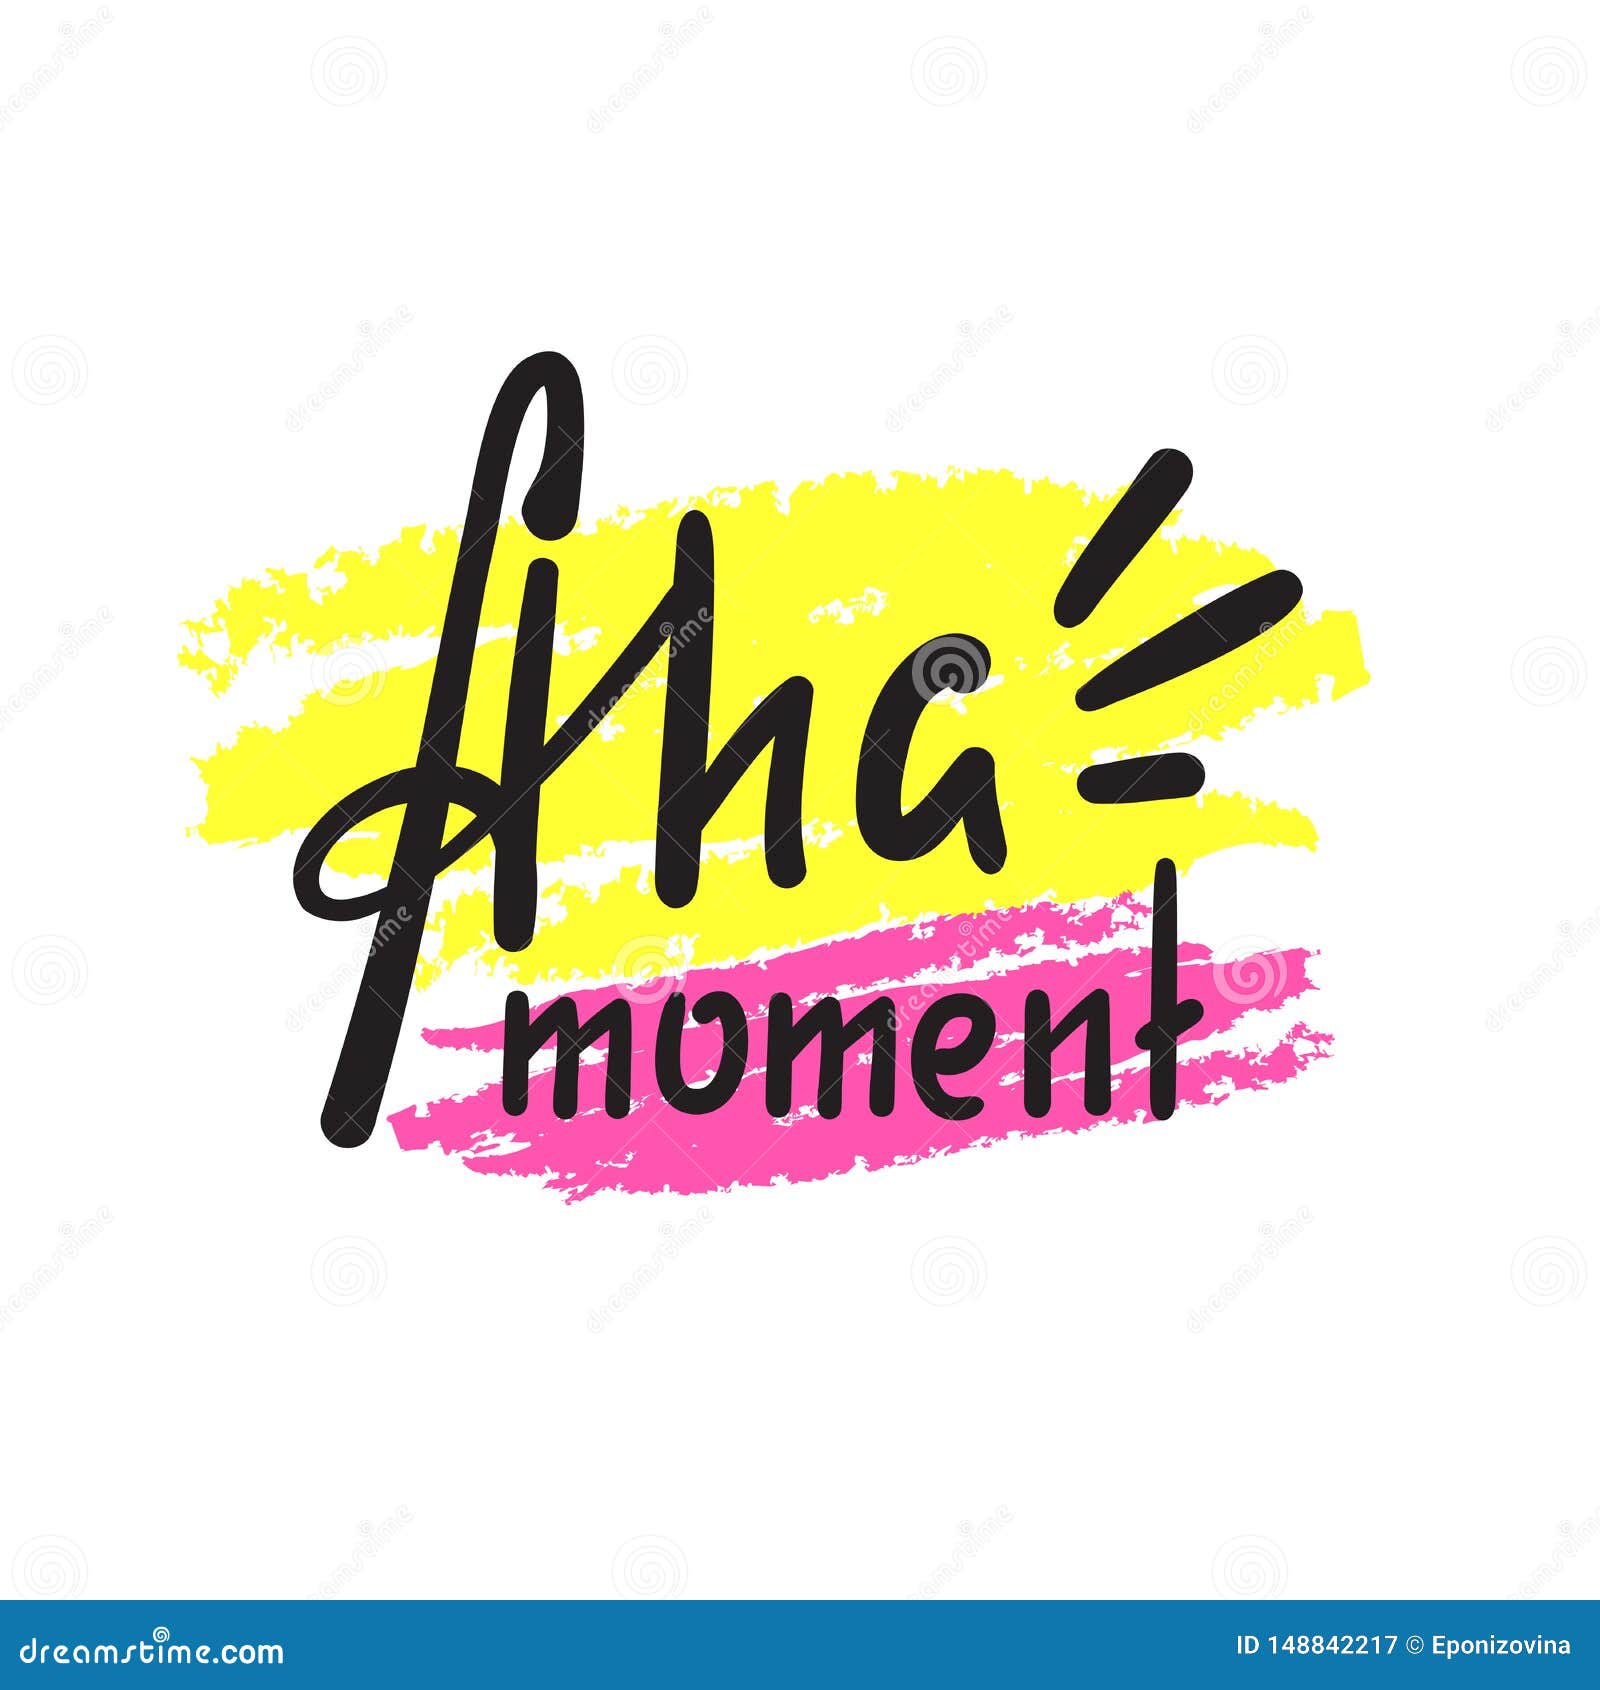 aha moment - simple inspire motivational quote. hand drawn lettering. youth slang, idiom. print